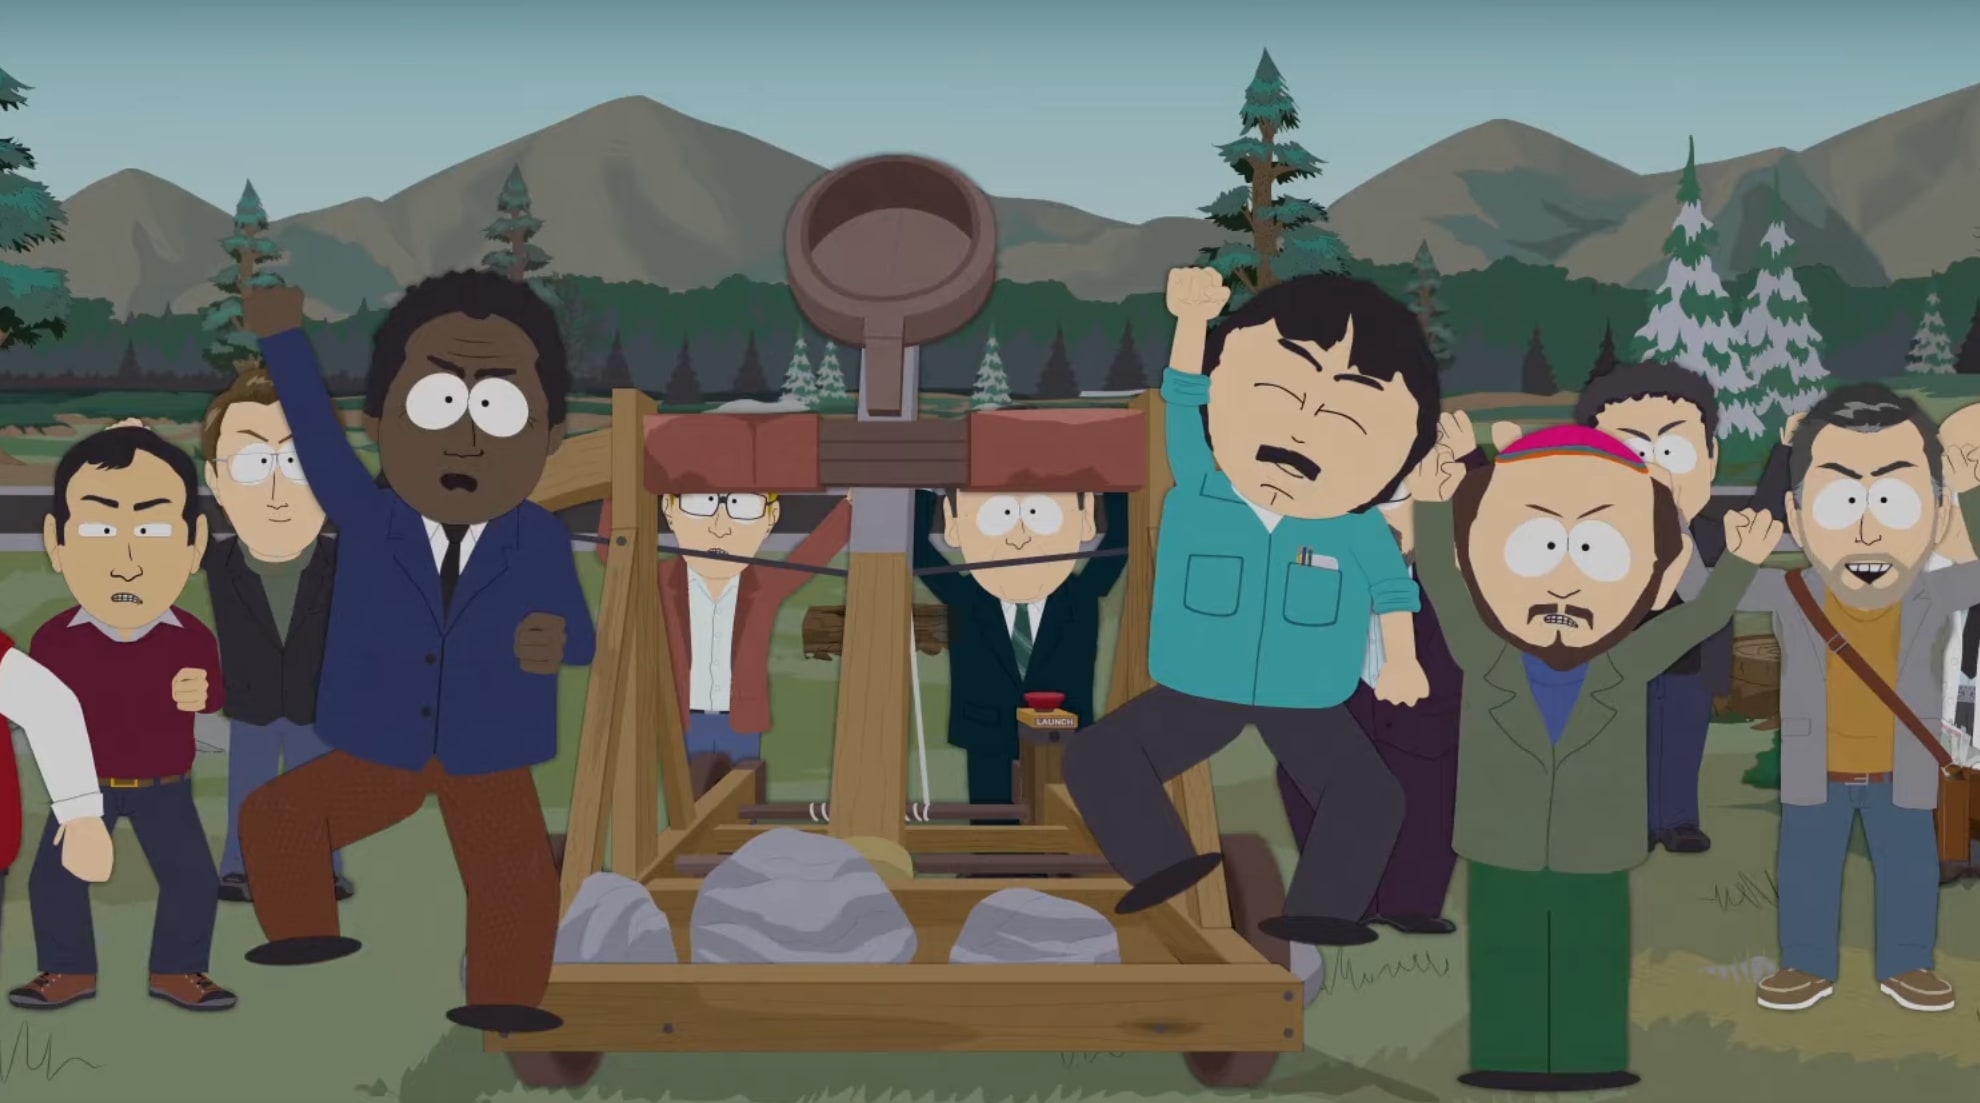 Fanatic Feed: South Park's New Movie, P-Valley Trailer, Tom Cruise